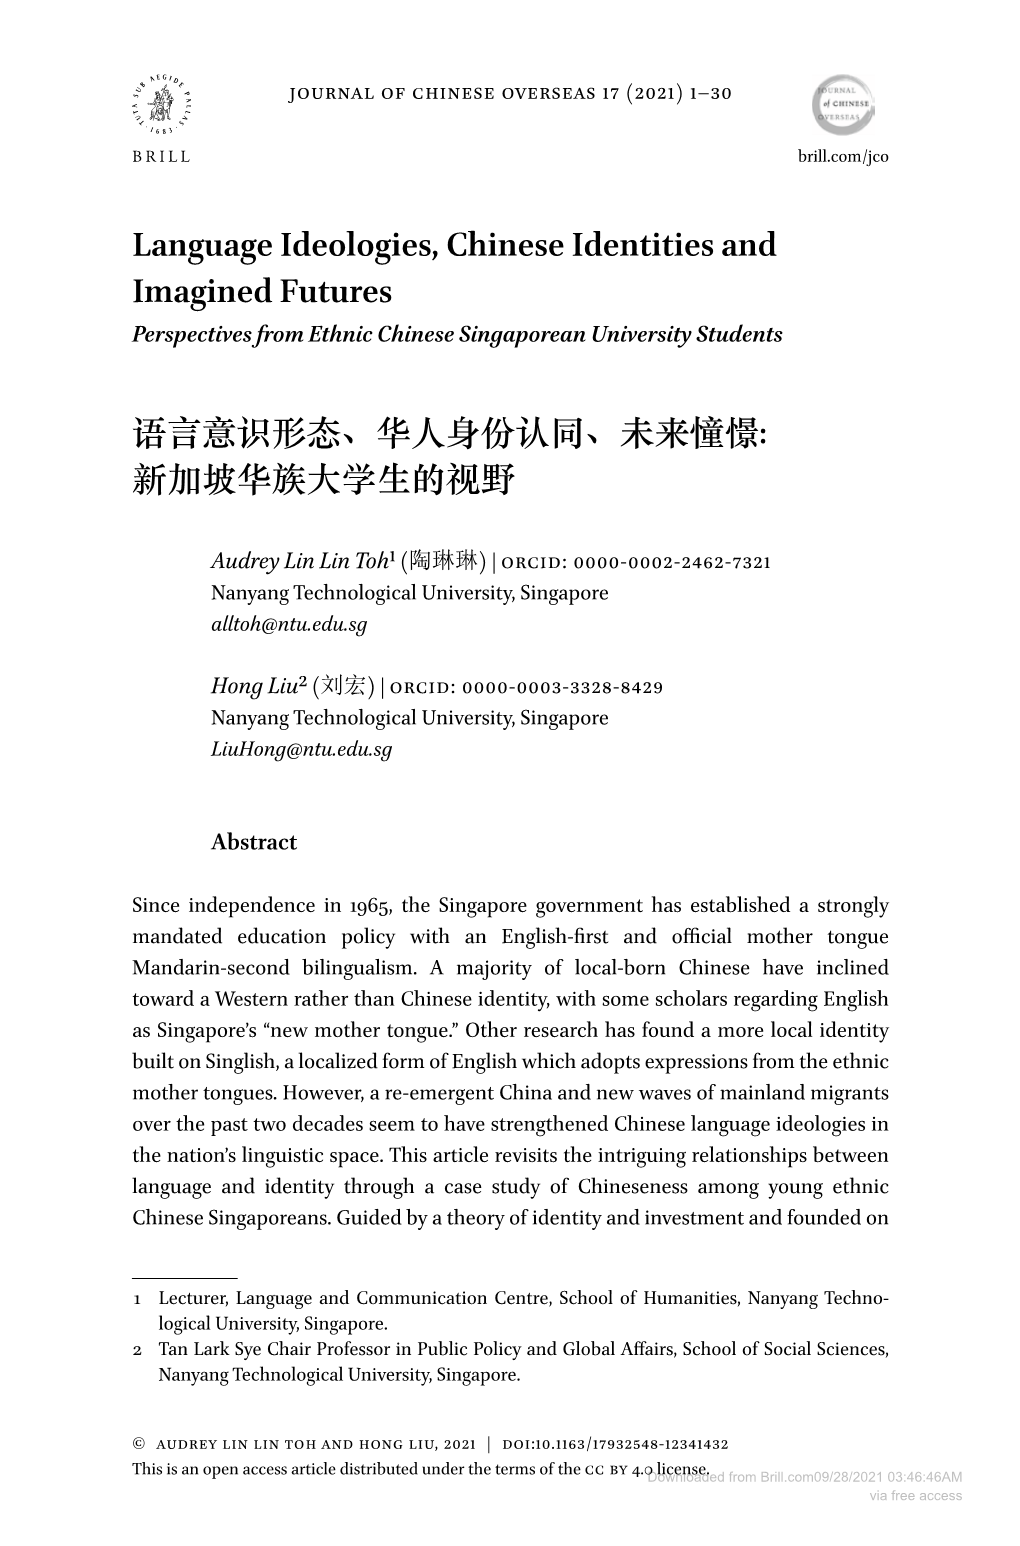 Language Ideologies, Chinese Identities and Imagined Futures Perspectives from Ethnic Chinese Singaporean University Students